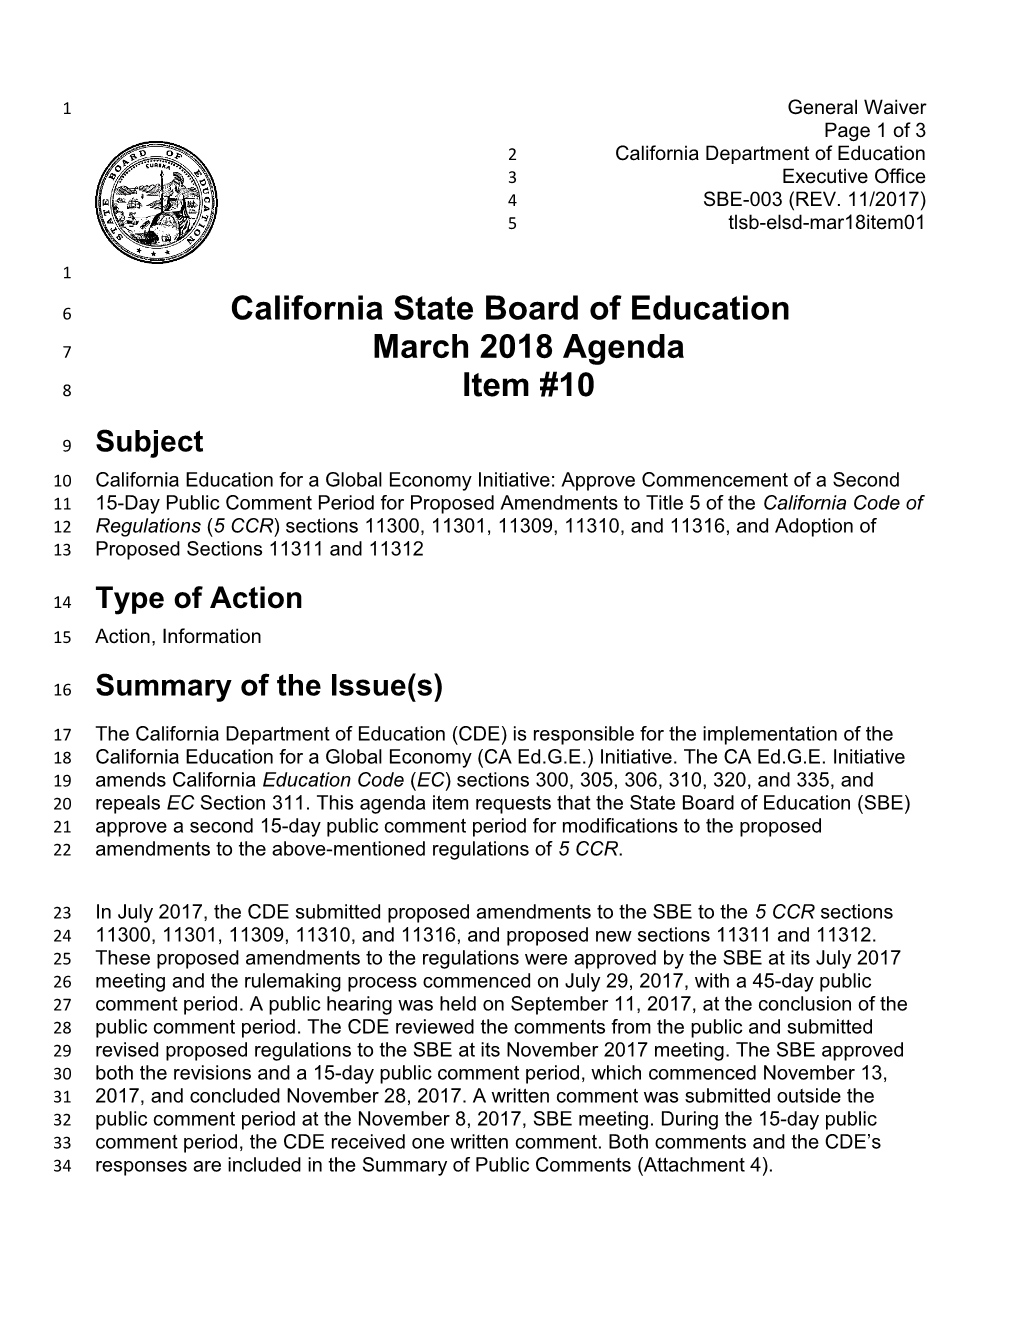 March 2018 Agenda Item 10 - Meeting Agendas (CA State Board of Education)